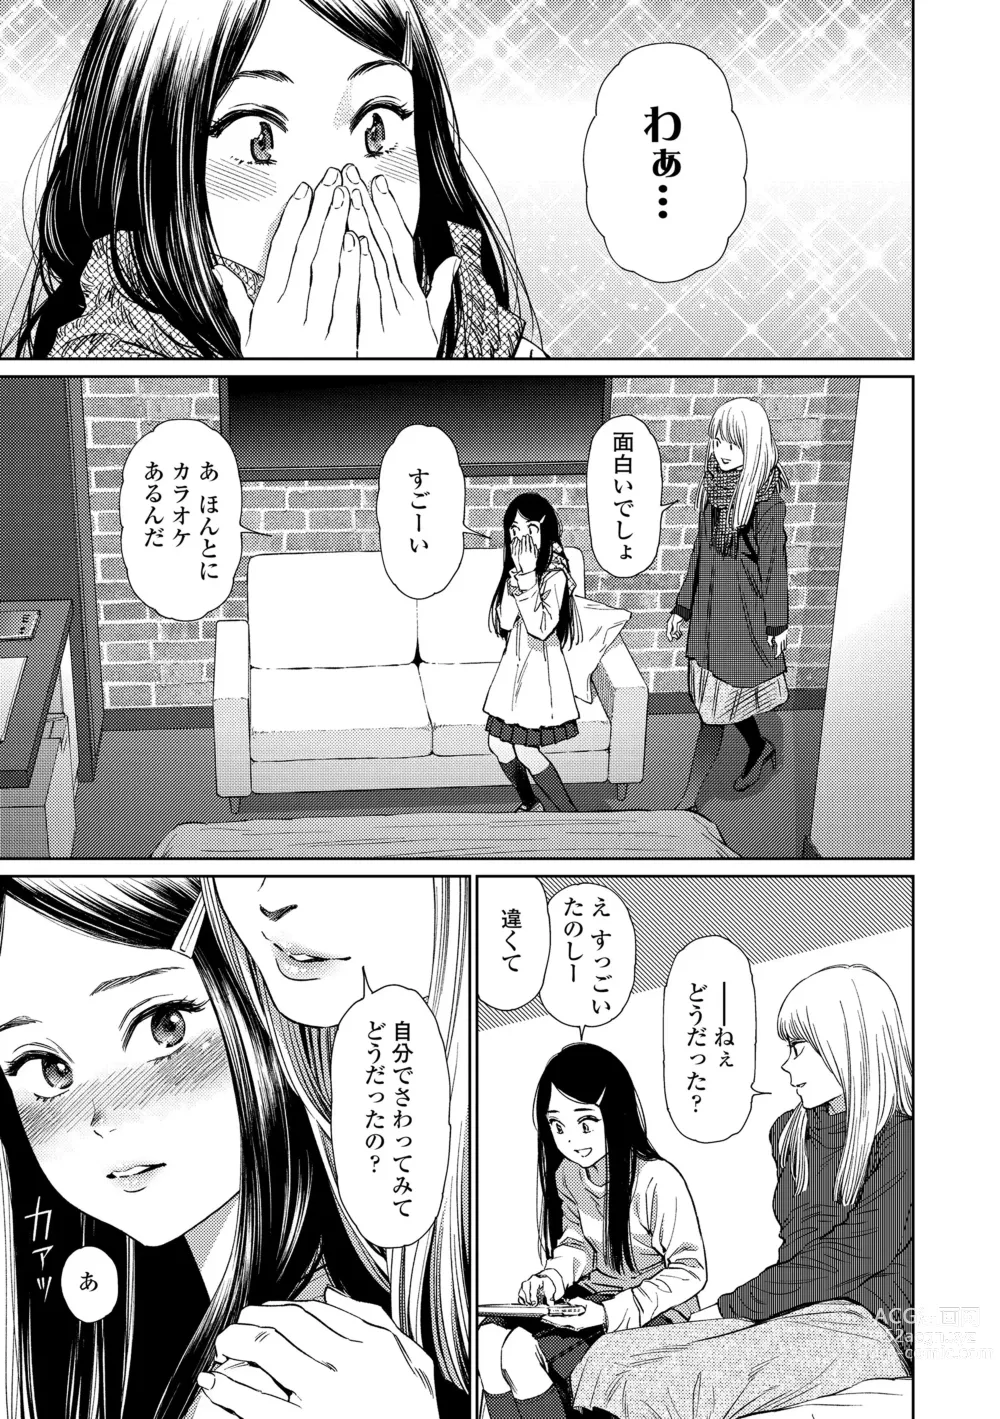 Page 9 of manga The Girllove Diary